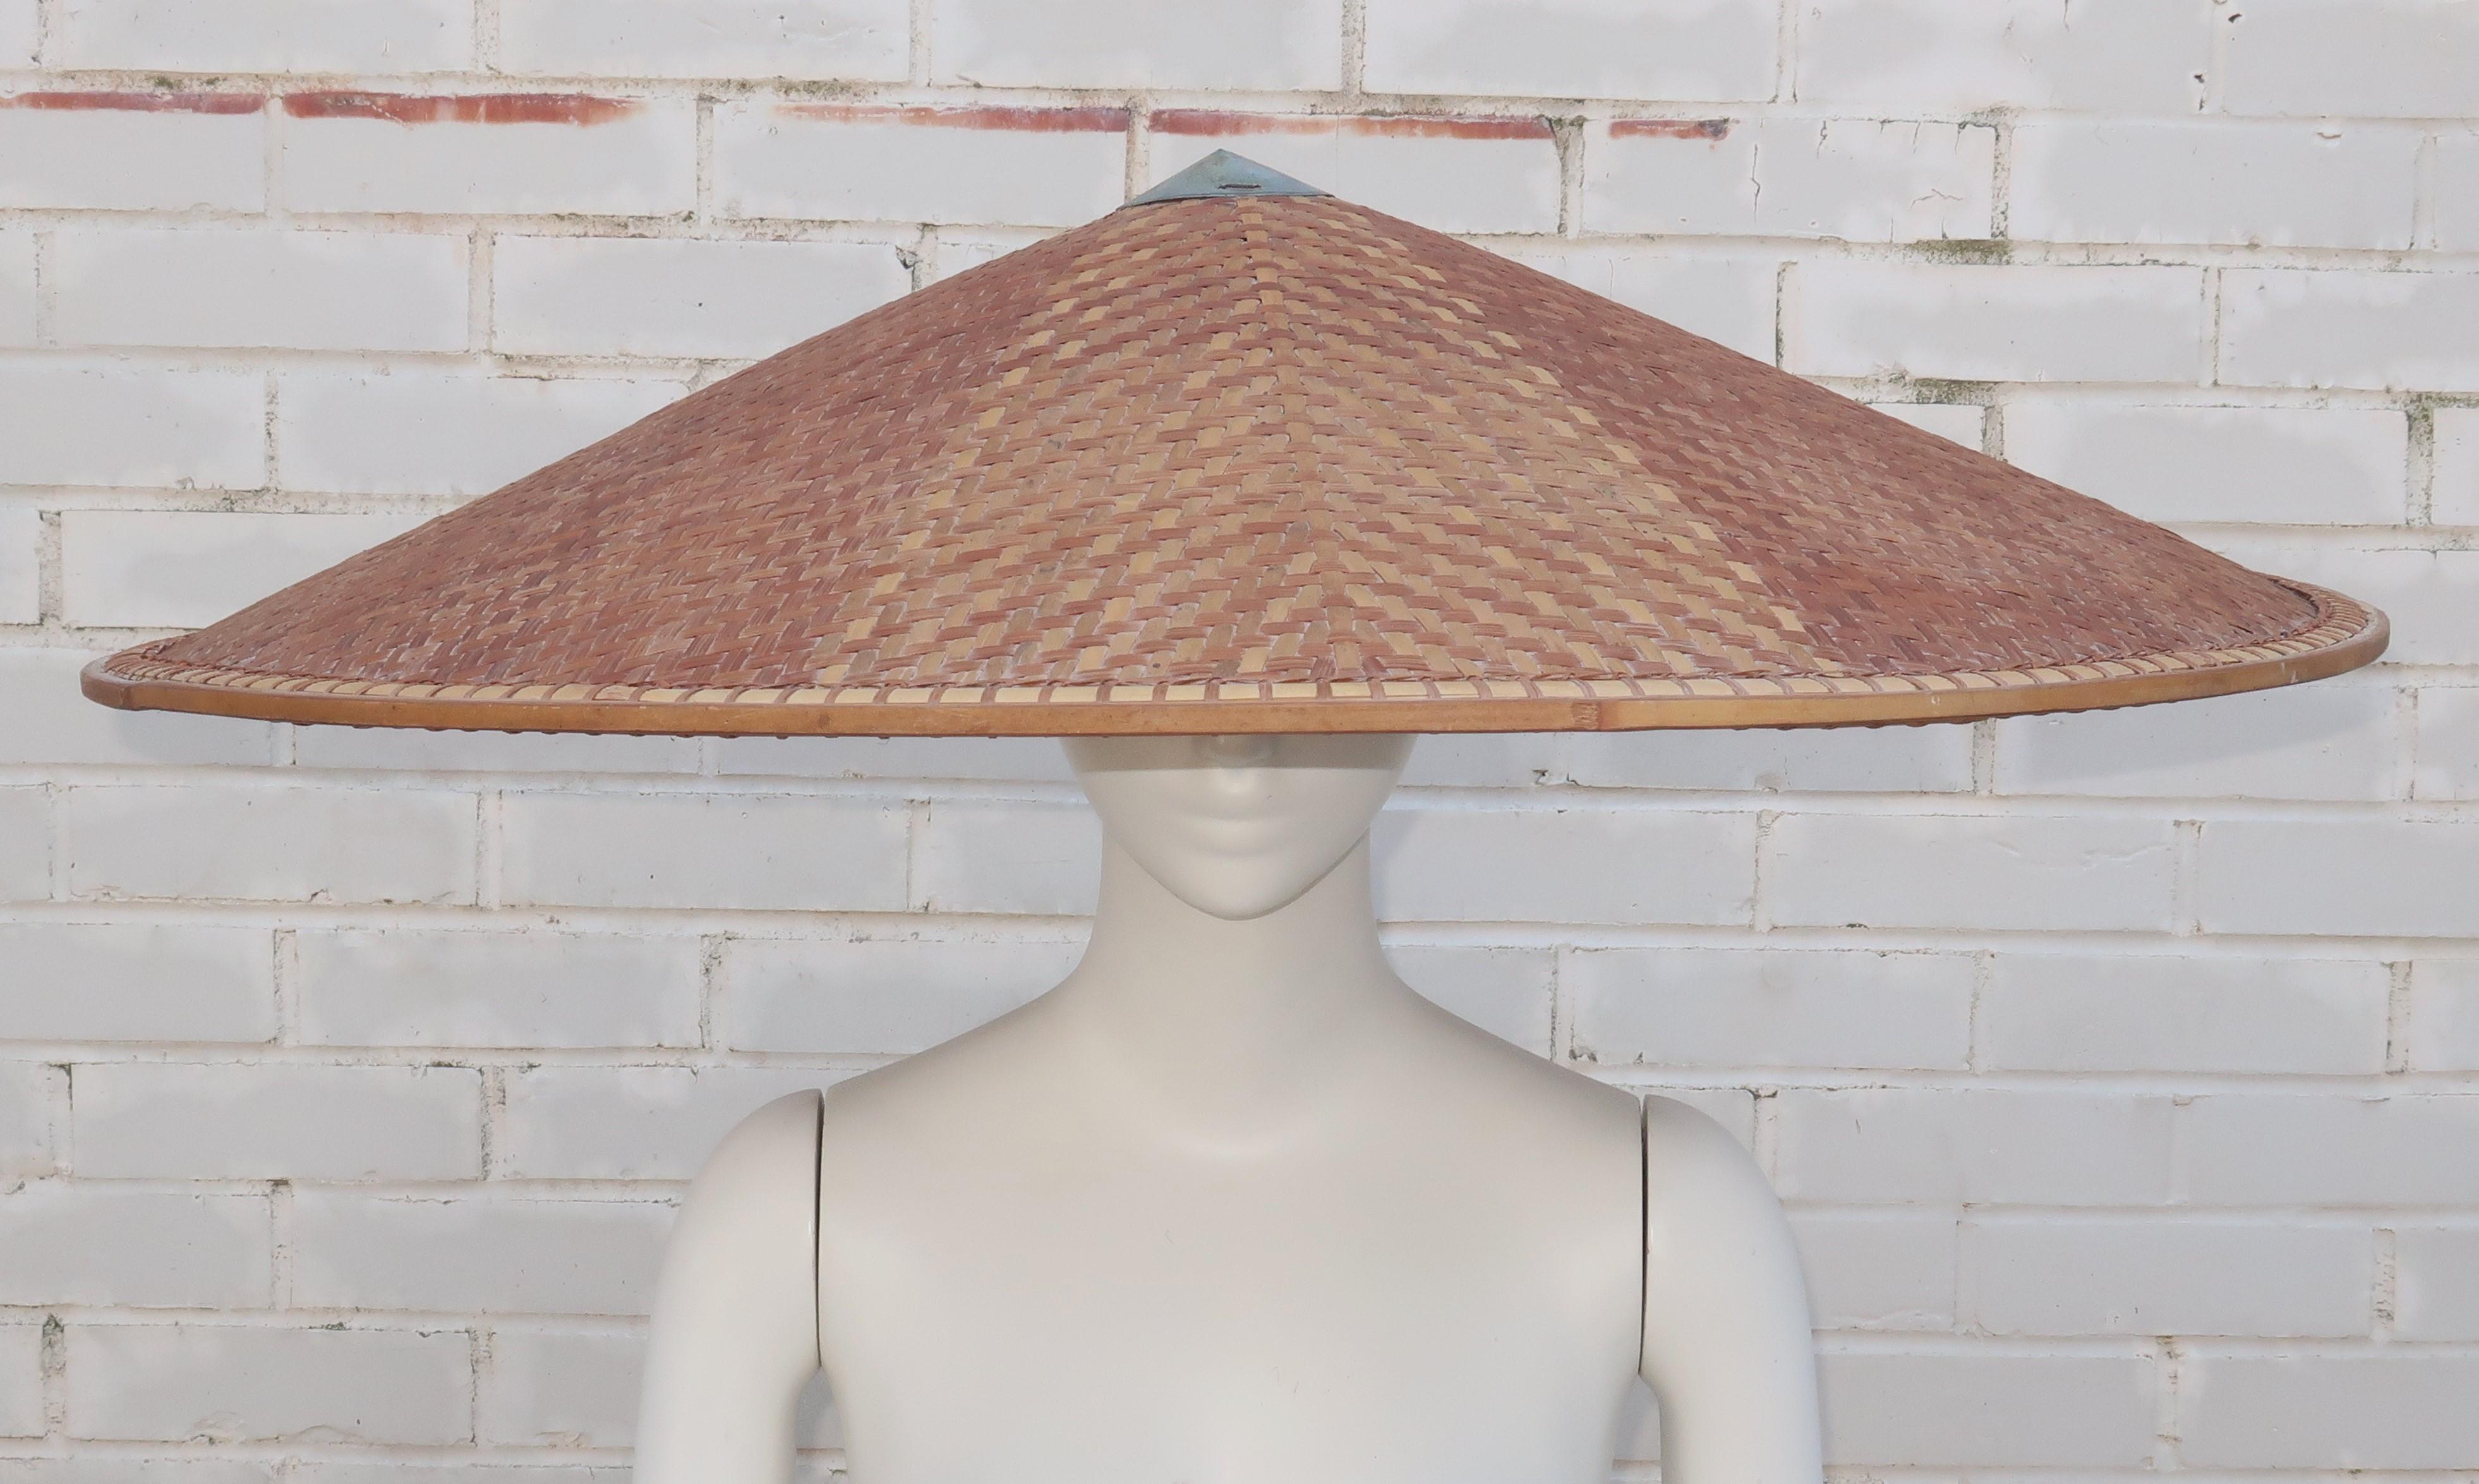 Large Novelty Wicker Straw Pagoda Beach Hat, 1950's For Sale 2